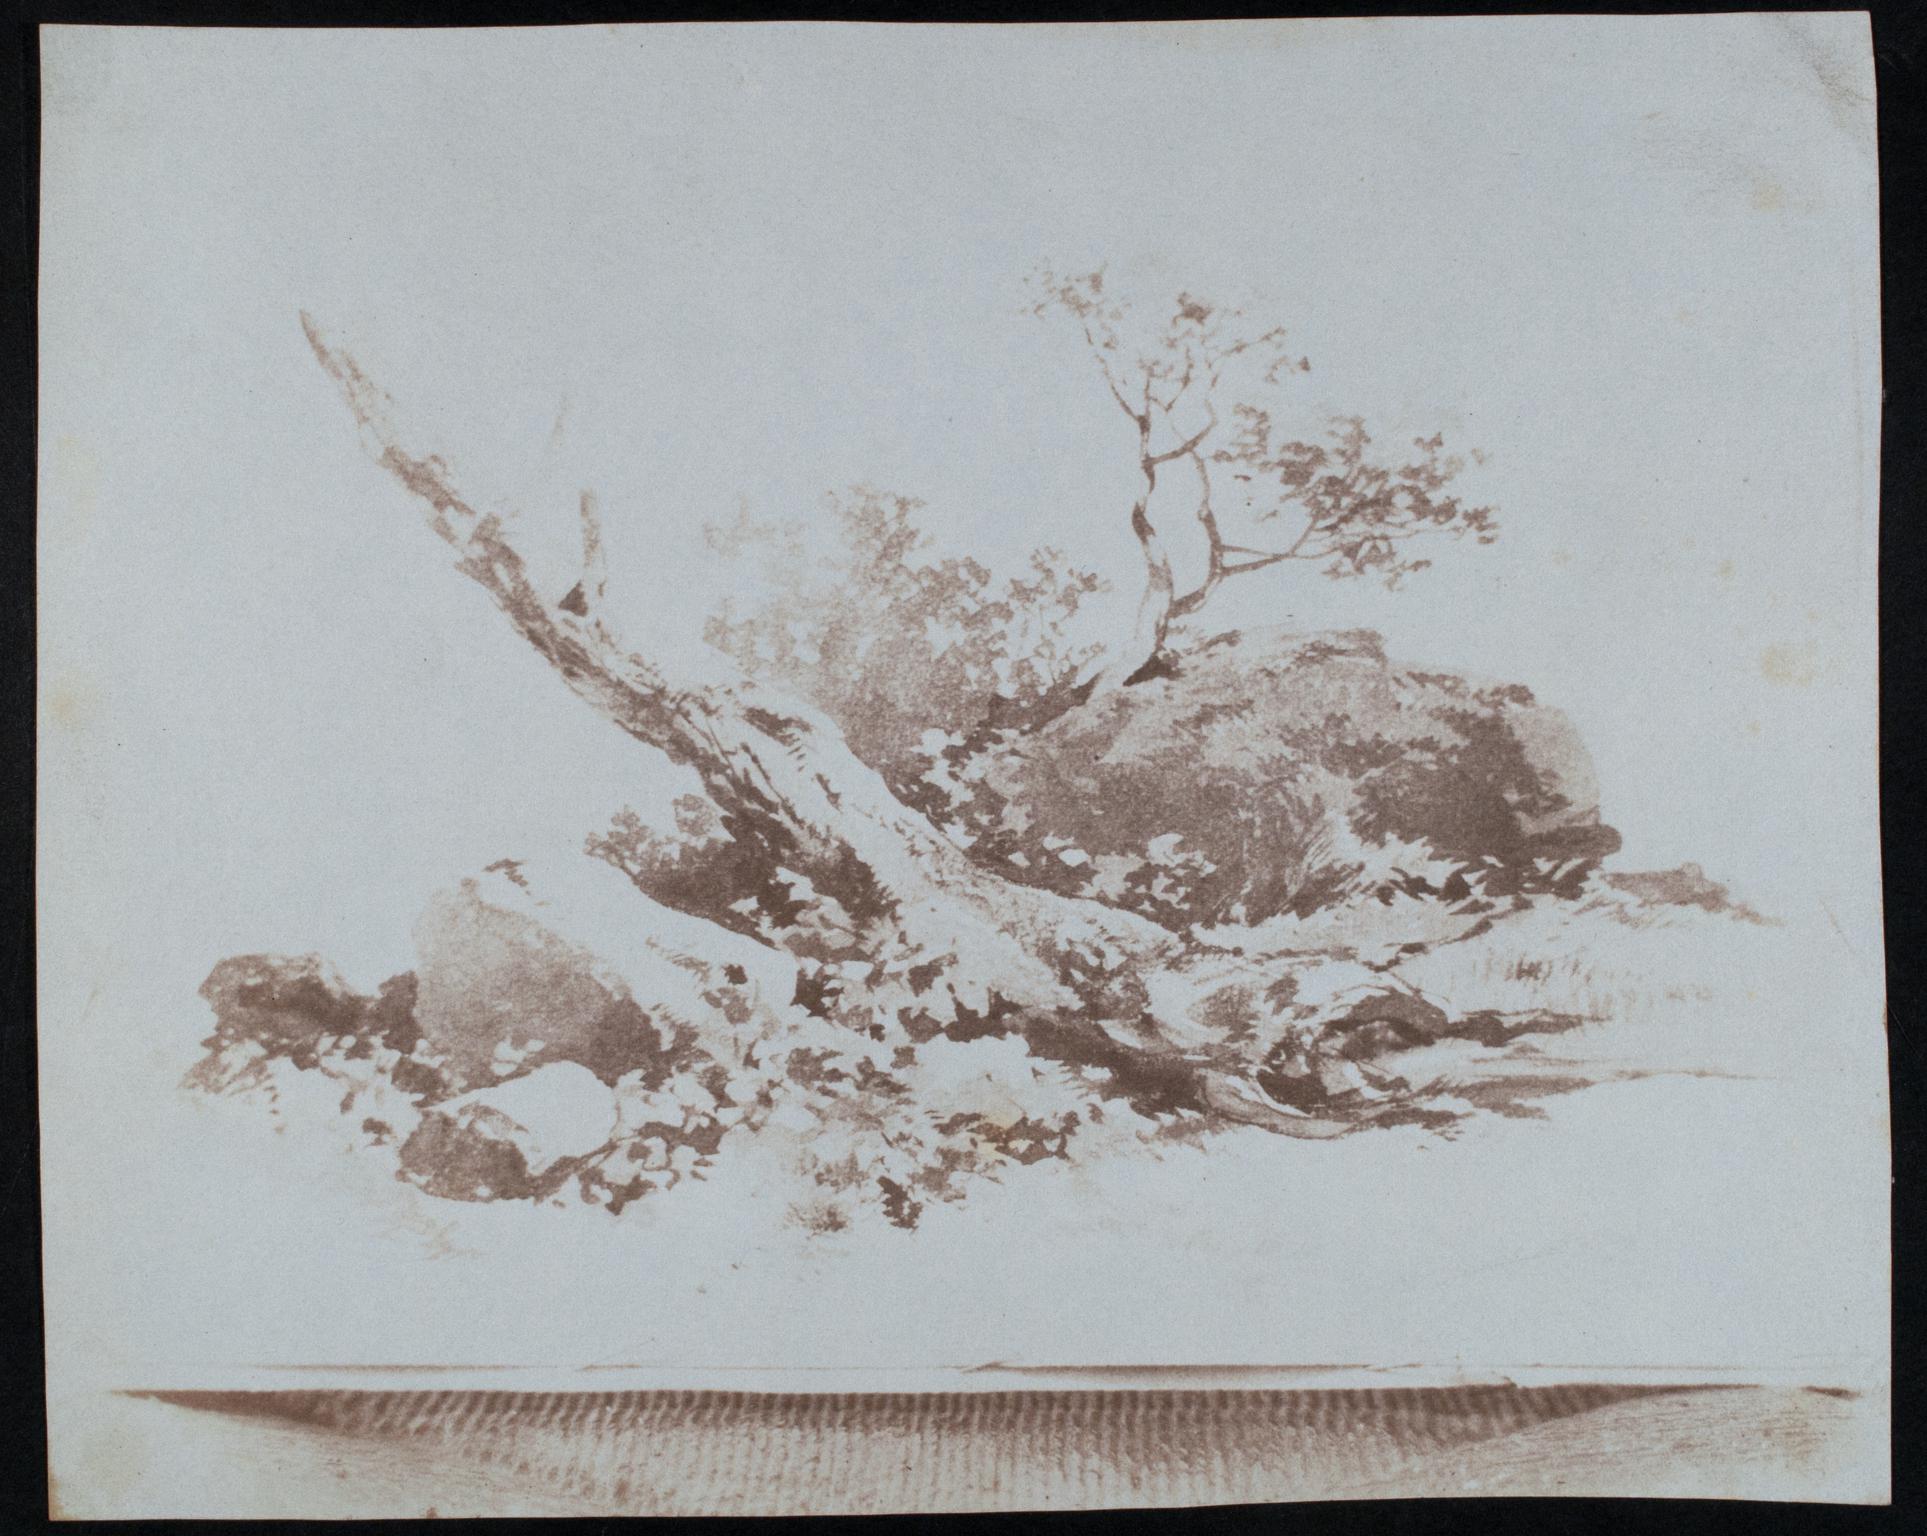 Drawing of rocks and trees, photograph